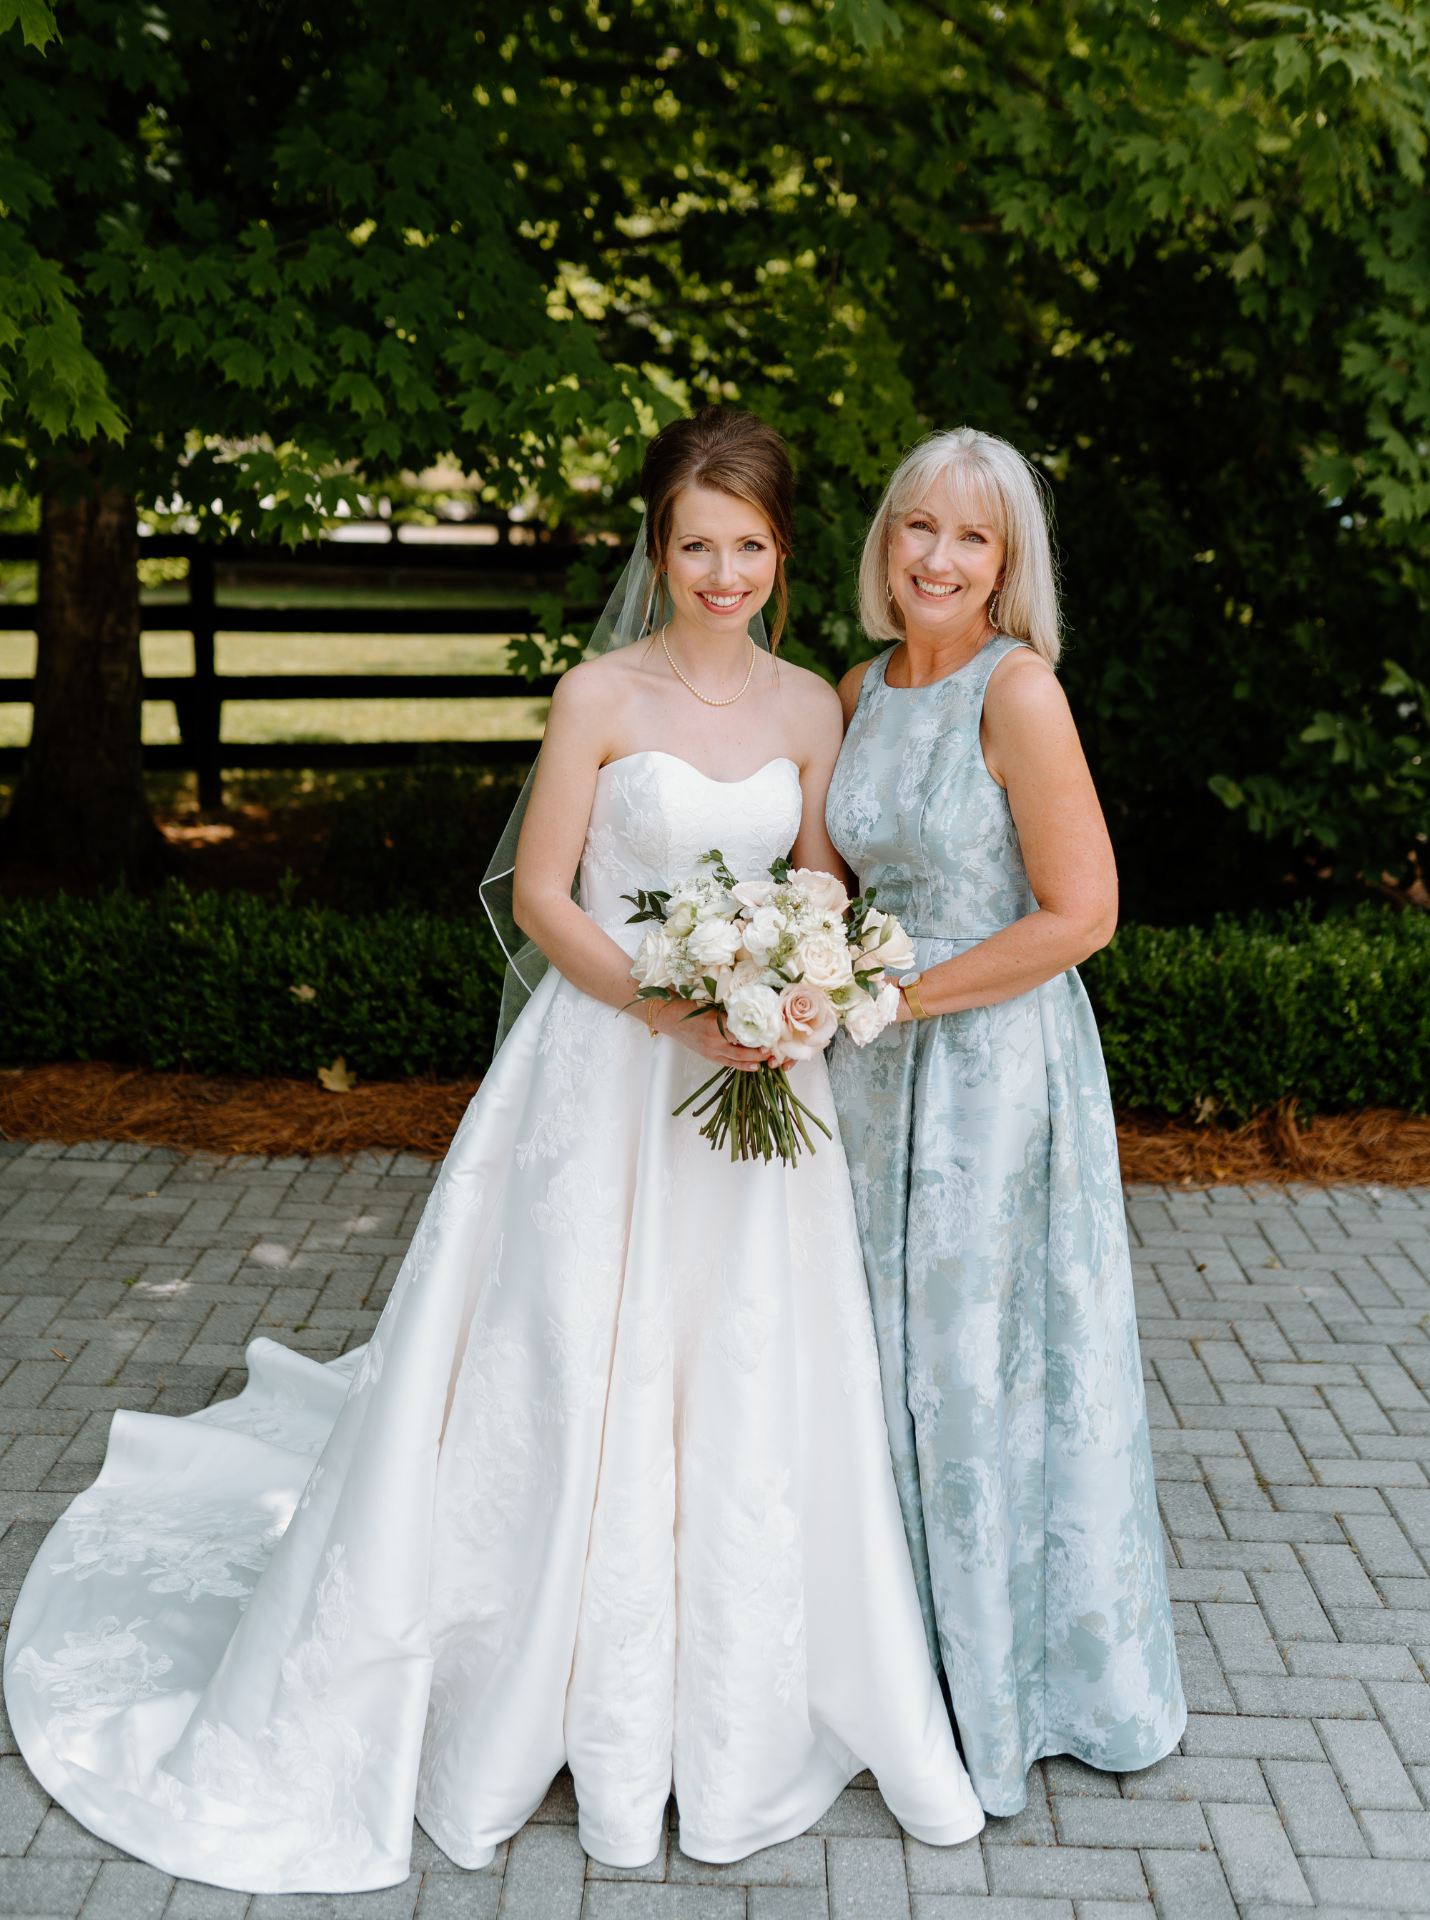 Etiquette Tips for the Mother of the Bride